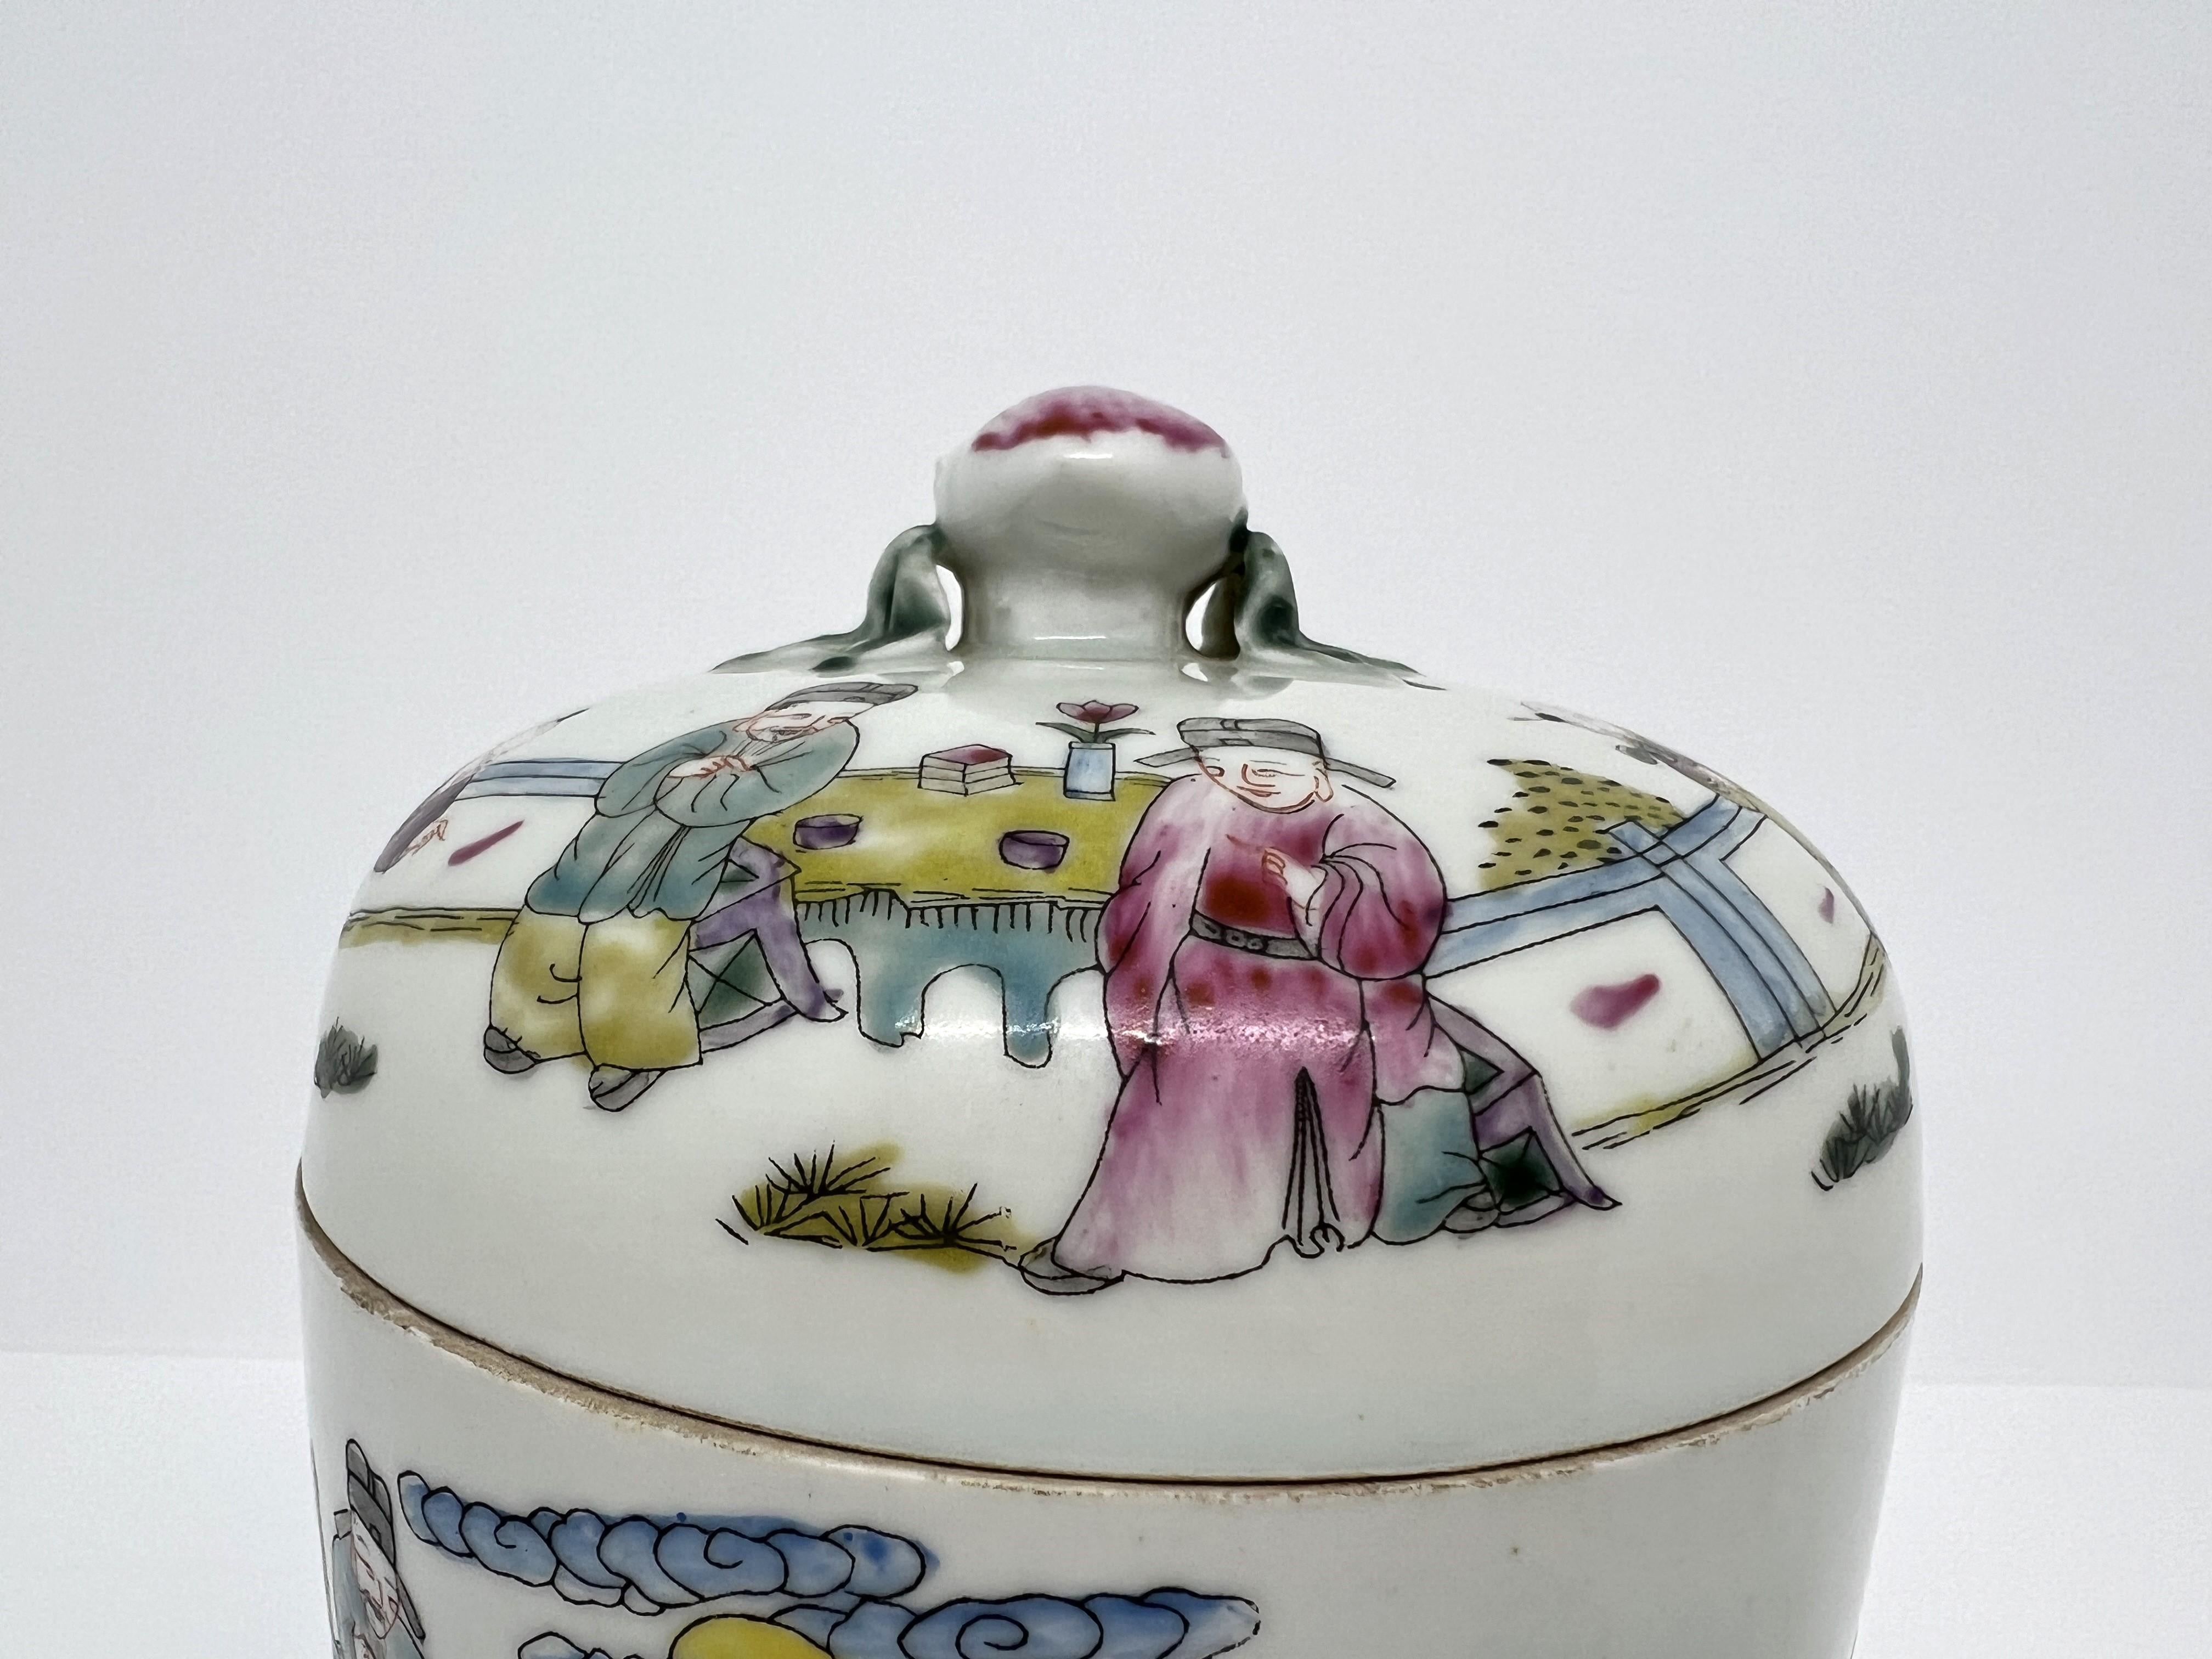 Mid-19th Century Chinese Famille Verte Jar with Horseback Riding, Qing Period, Tongzhi Era For Sale